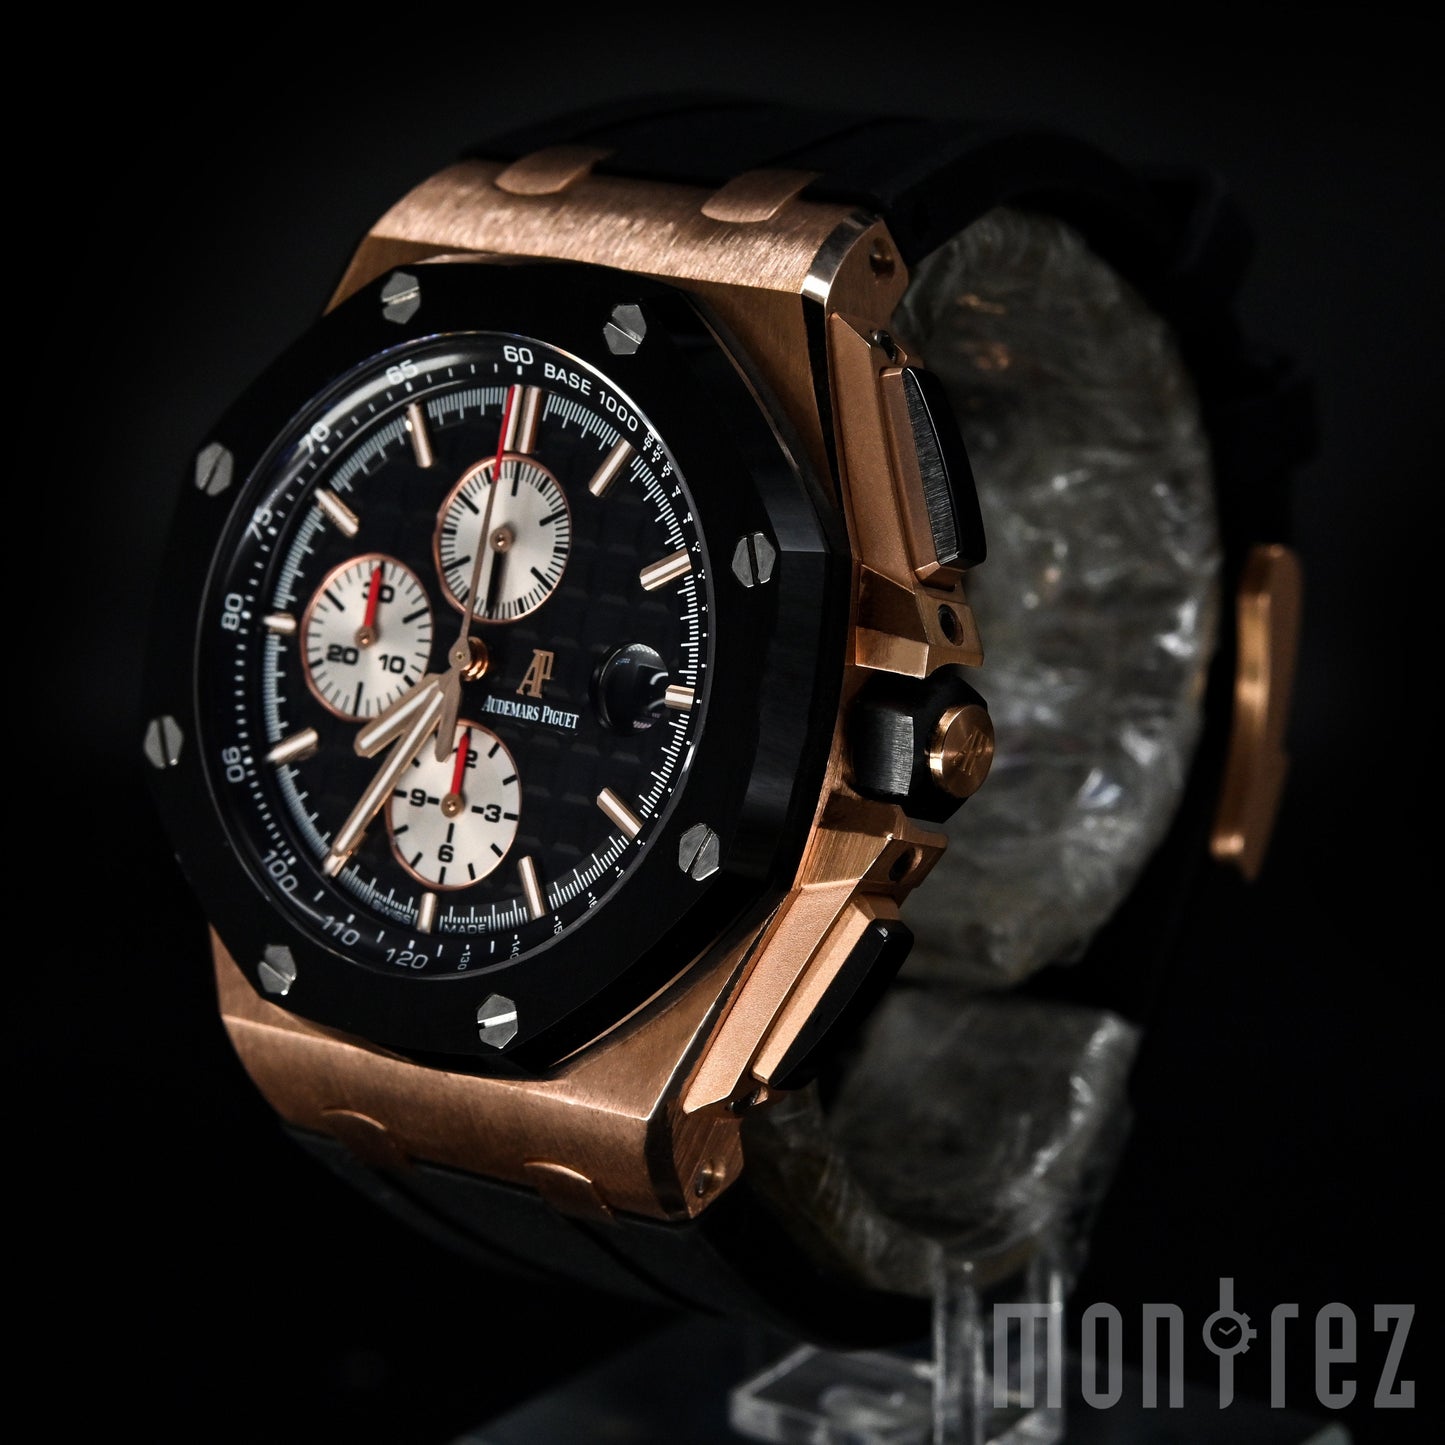 [Pre-Owned Watch] Audemars Piguet Royal Oak Offshore Chronograph 44mm 26401RO.OO.A002CA.01 (Out of Production)